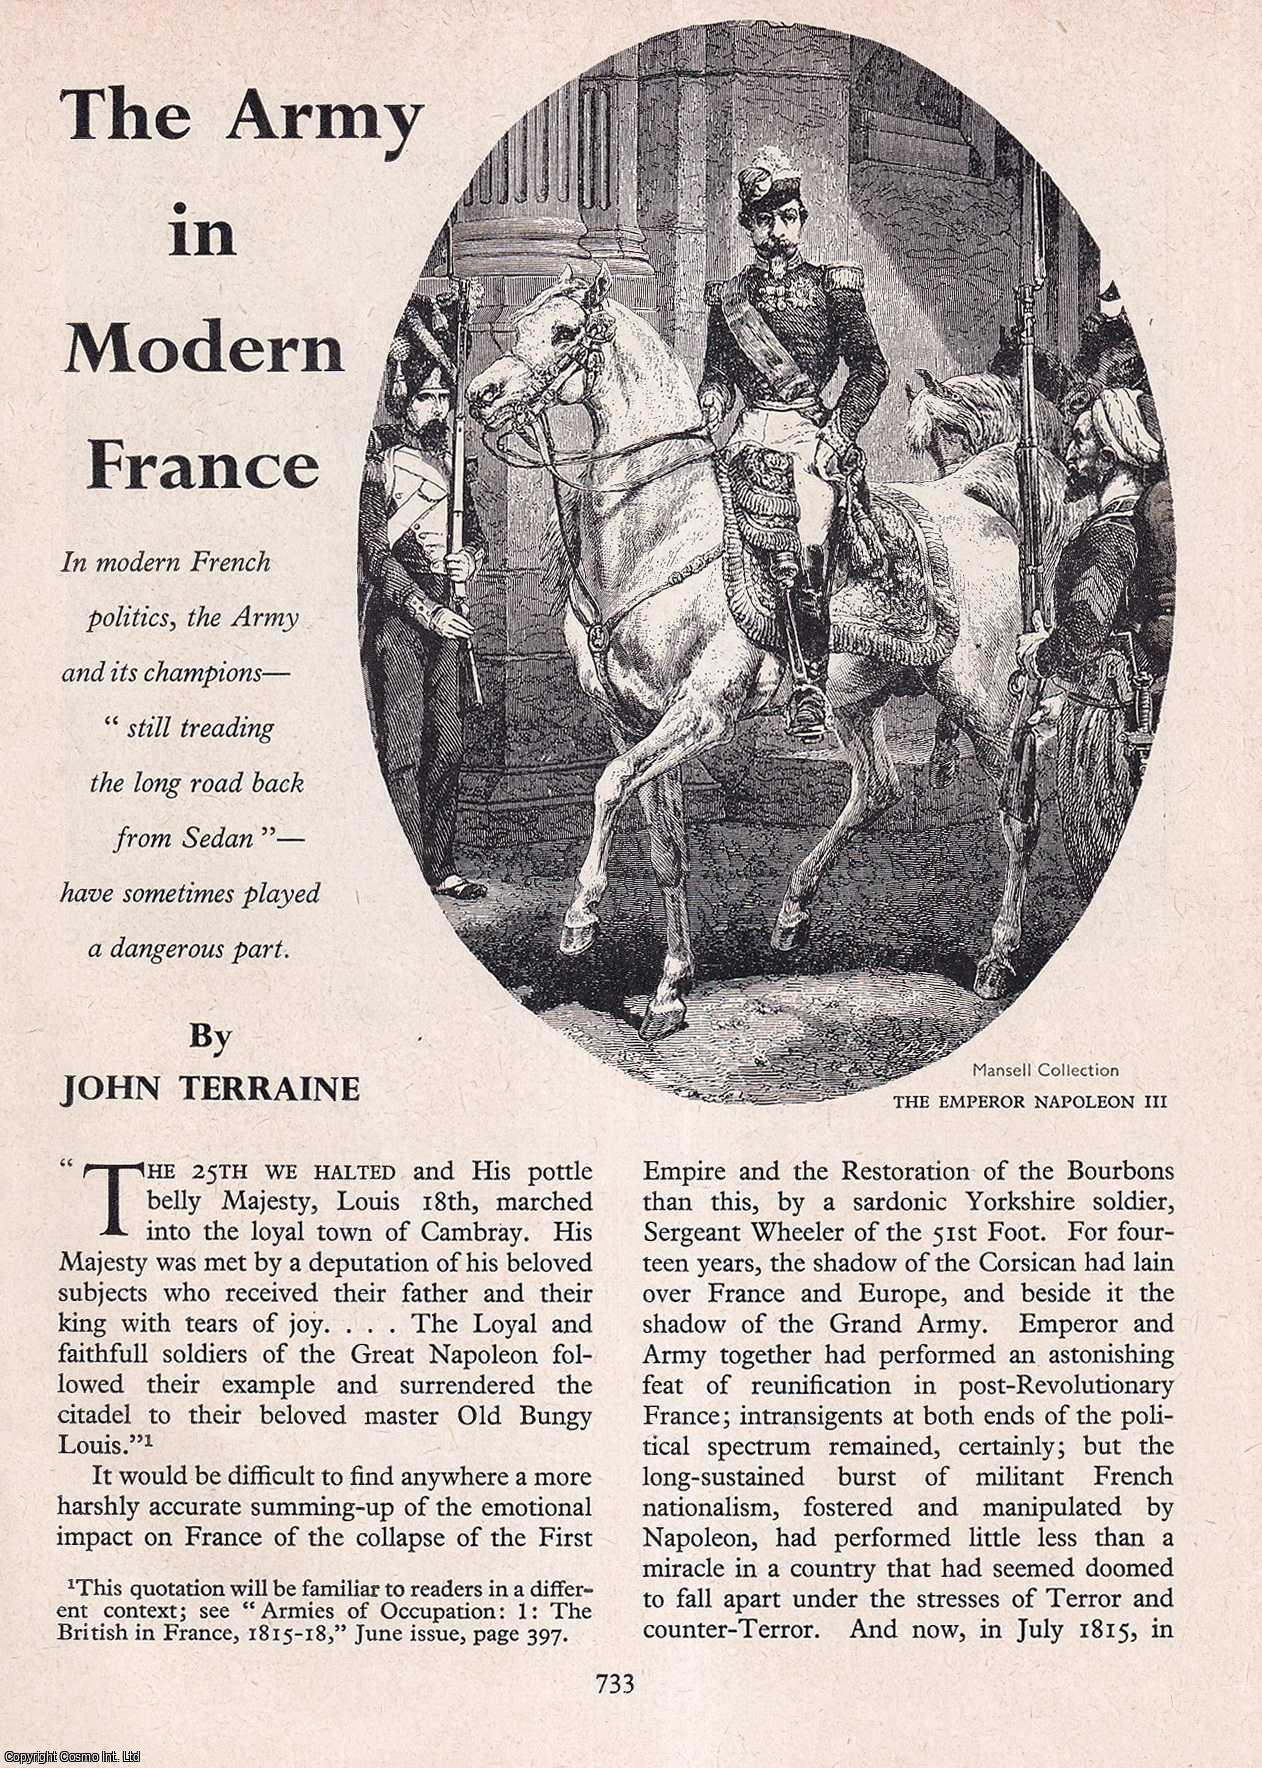 John Terraine - The Army in Modern France. An original article from History Today magazine, 1961.